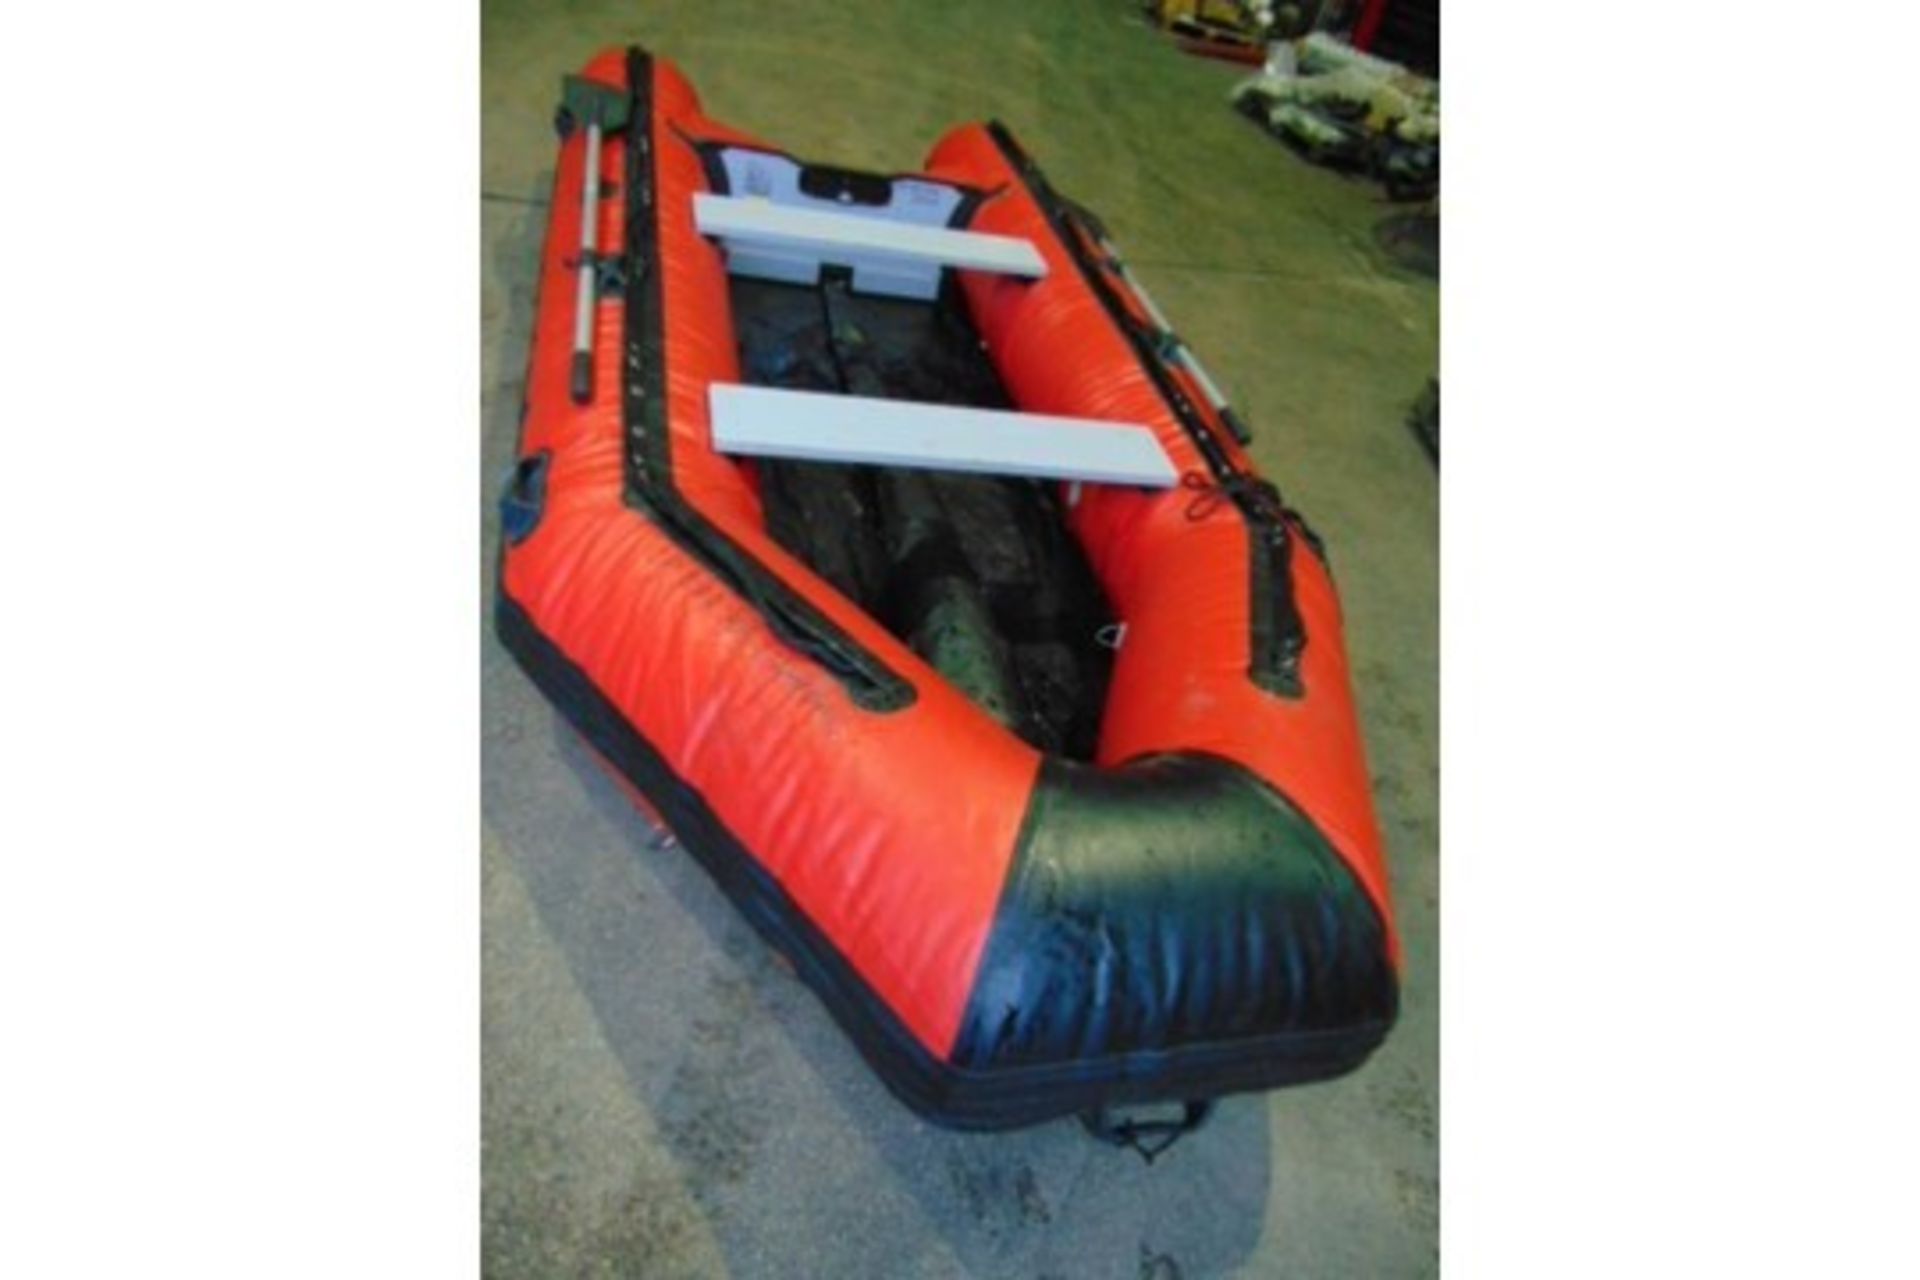 Inflatable Flood Rescue Boat